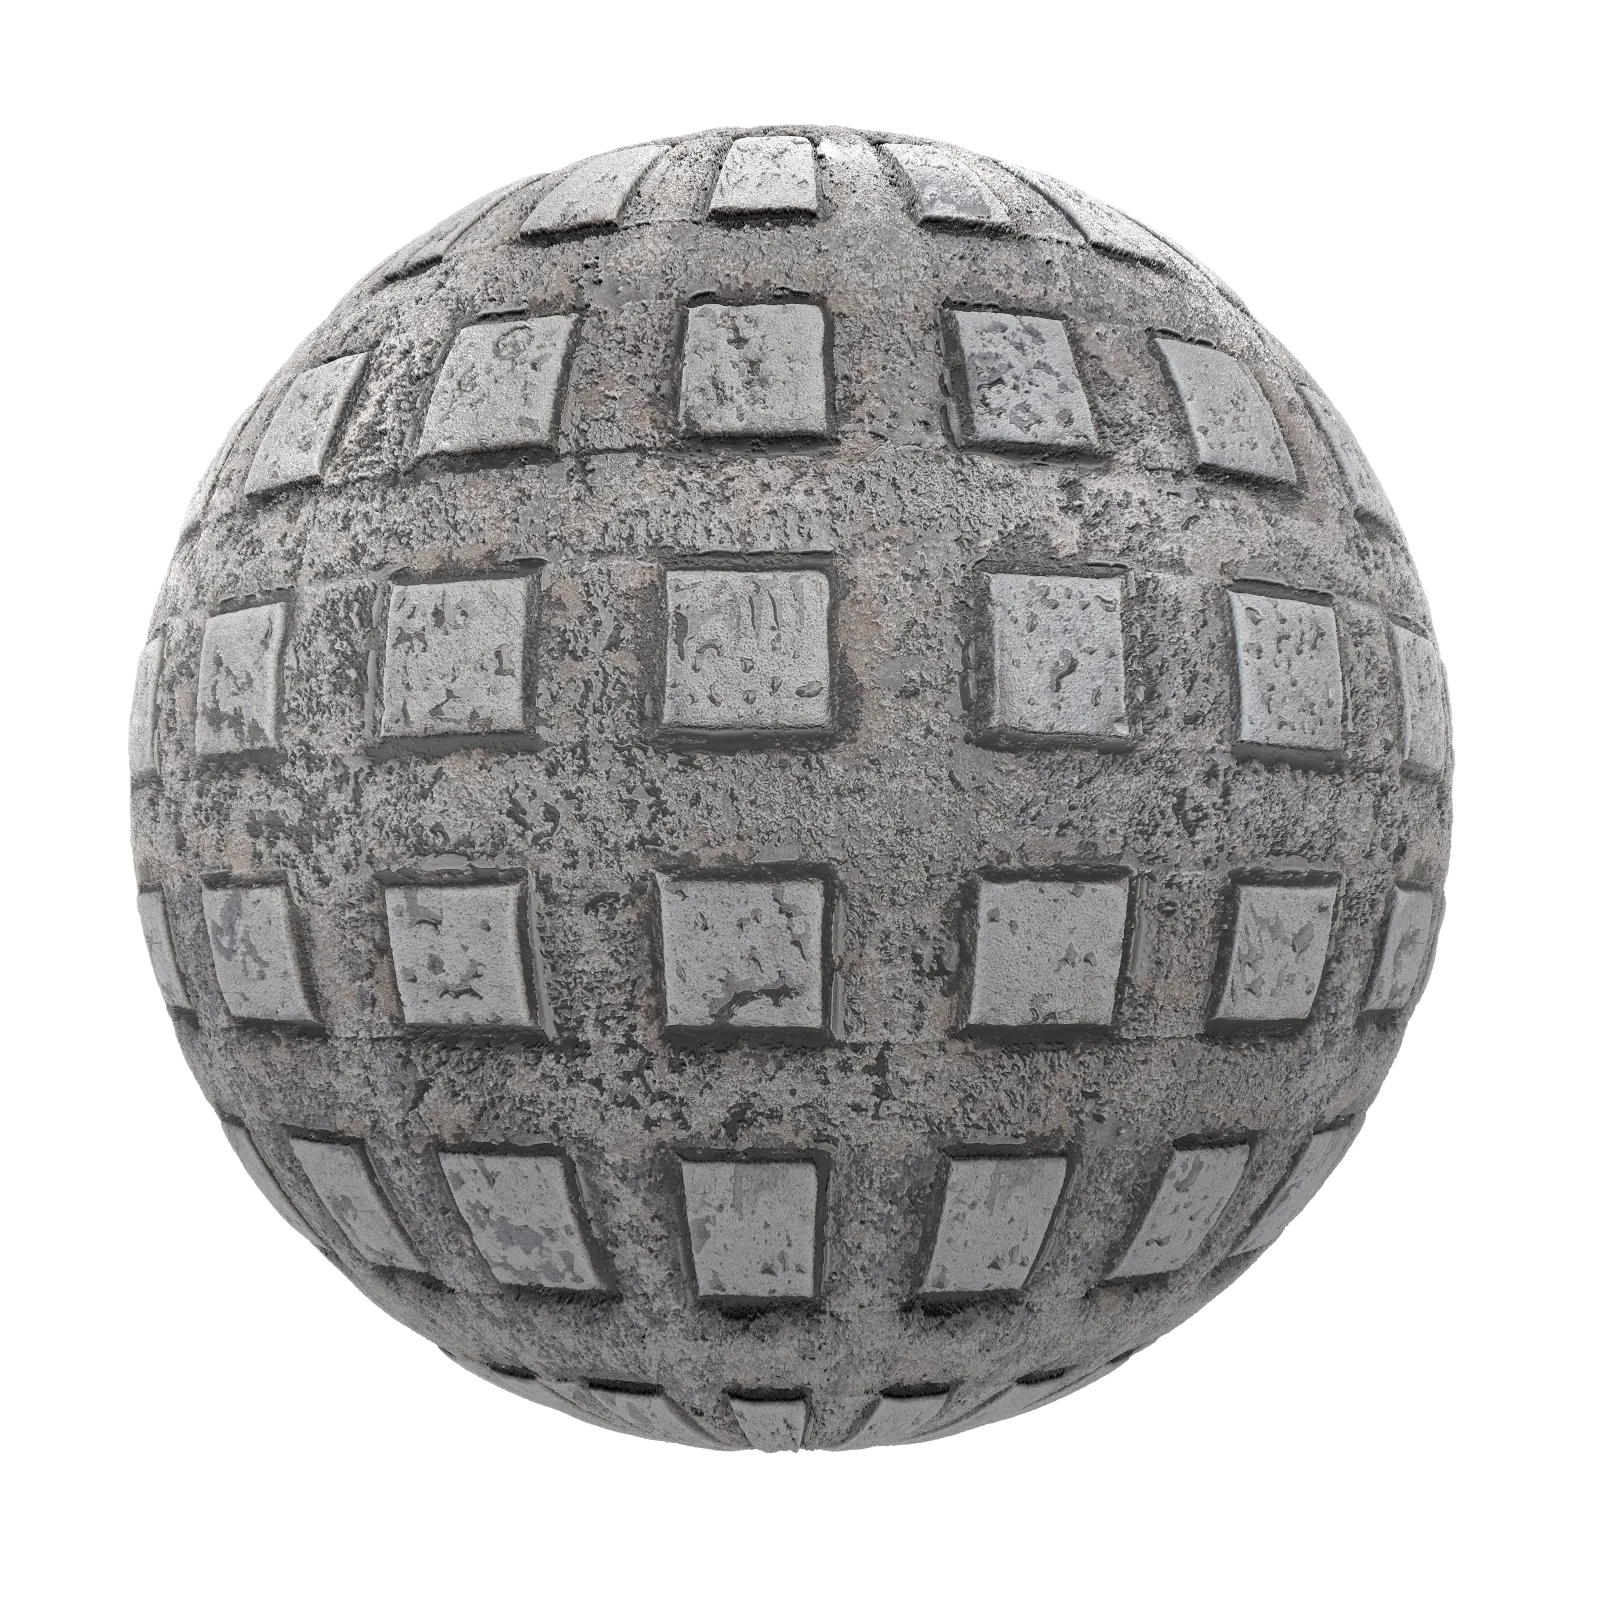 PBR CGAXIS TEXTURES – METALS – Patterned Old Metal 01